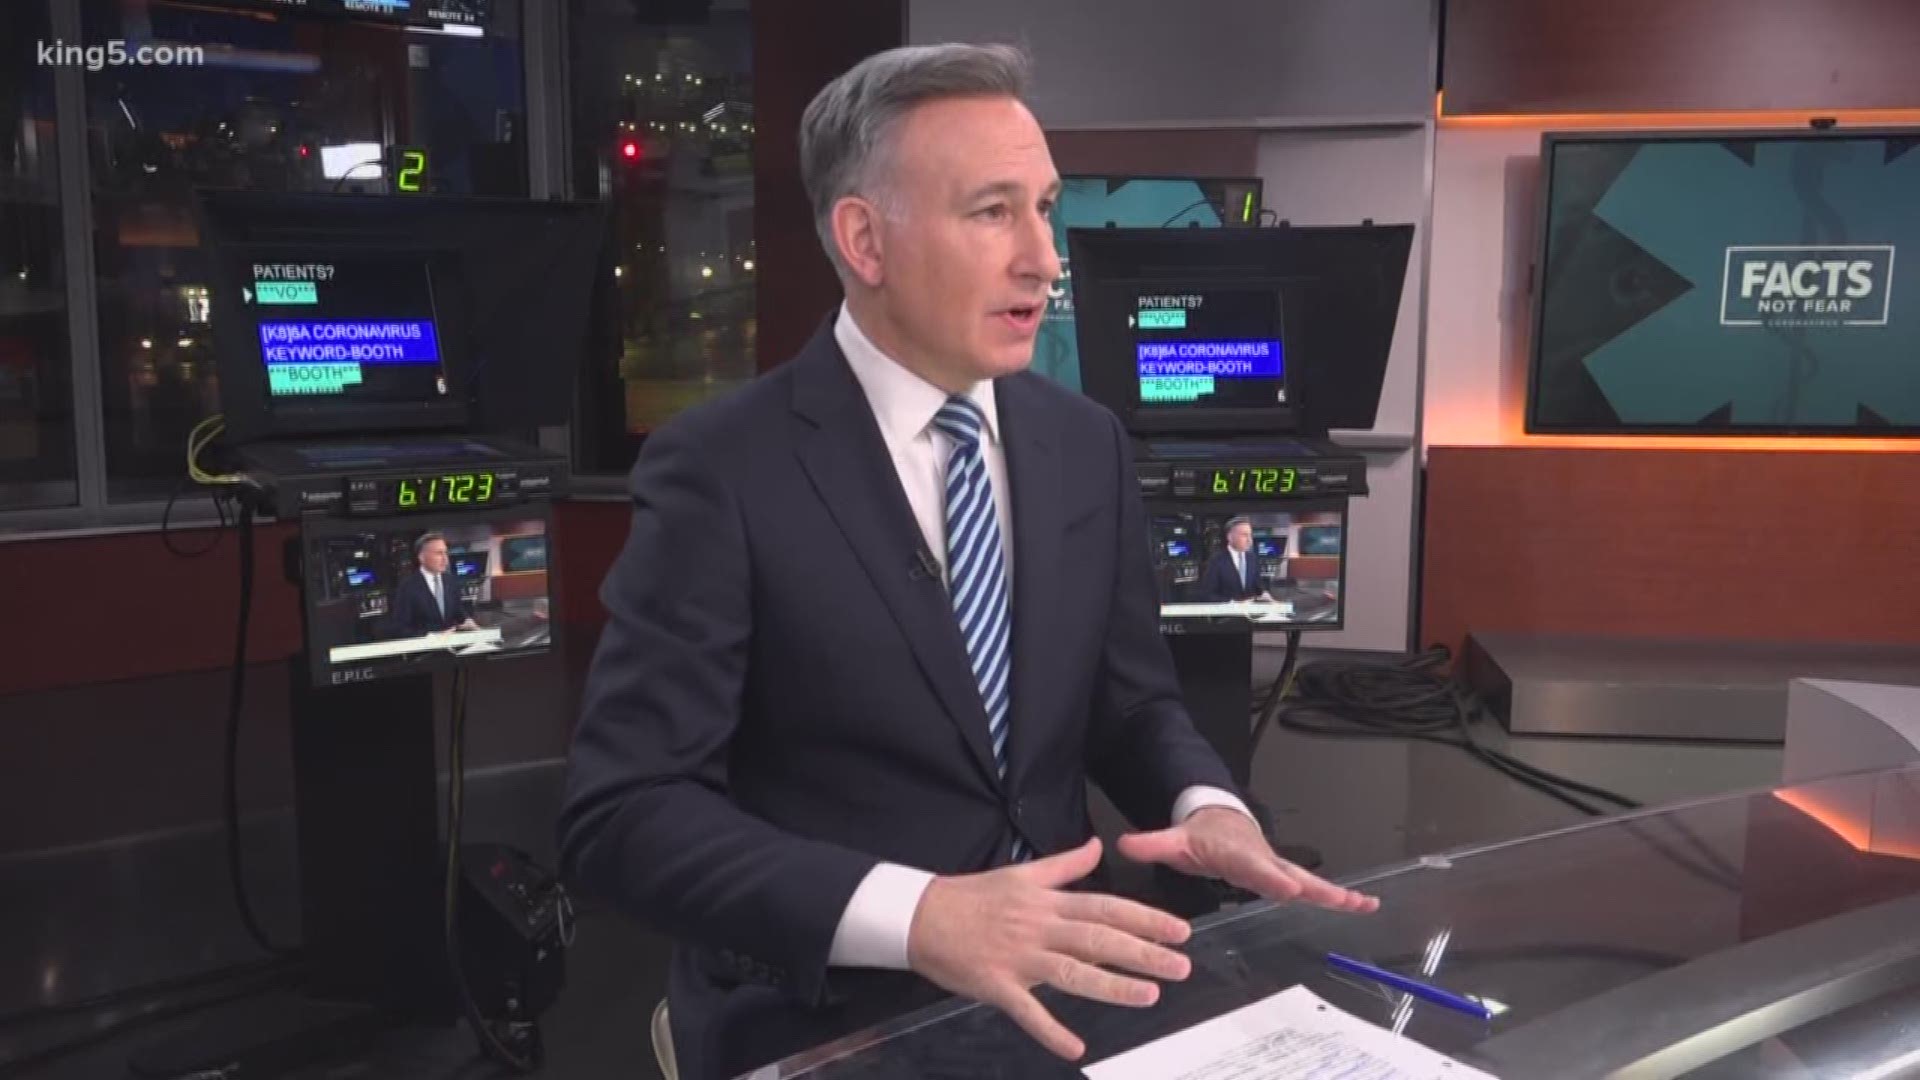 King County Executive Dow Constantine discusses the way the county is mobilizing to treat coronavirus patients and stop the spread of the virus.